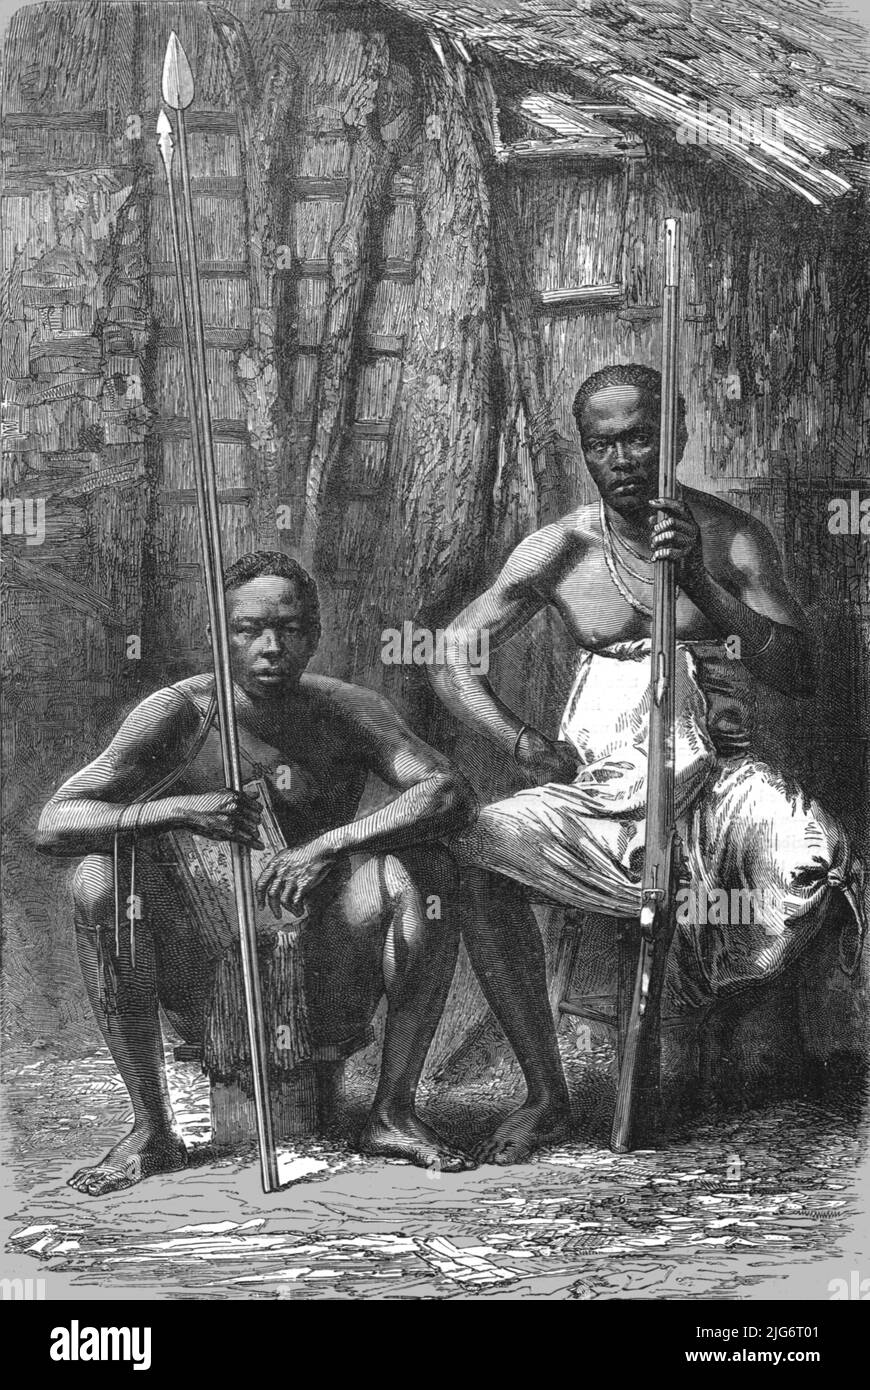 'Natives of the Rovuma; The Finding of Dr. Livingstone', 1875. [Men from the Ruvuma or Rovuma River area in the African Great Lakes region. Henry Morton Stanley found Scottish missionary David Livingstone in the town of Ujiji, in what is now western Tanzania, on 10 November 1871]. From, 'Illustrated Travels' by H.W. Bates. [Cassell, Petter, and Galpin, c1880, London] Belle Sauvage Works.London E.C. Stock Photo